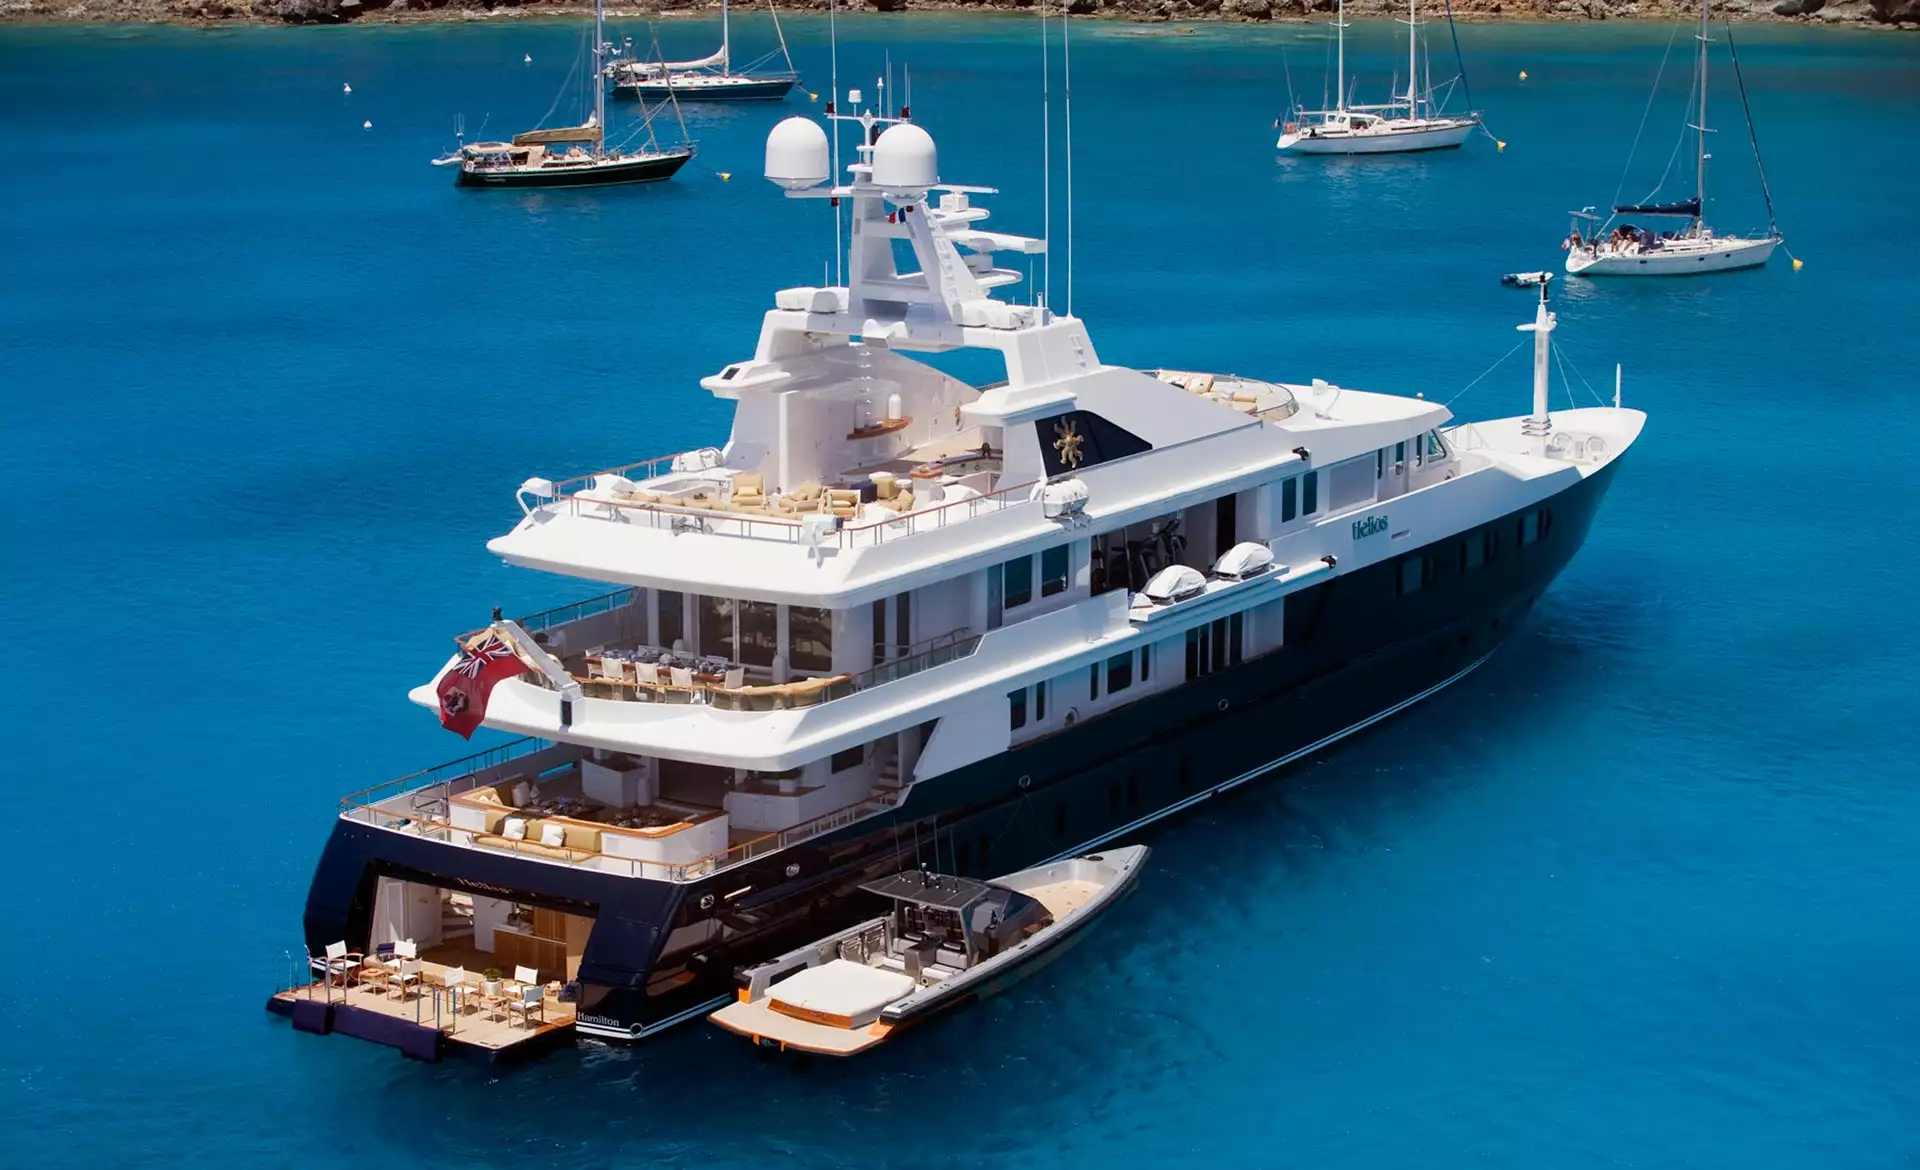 helios 2 yacht owner